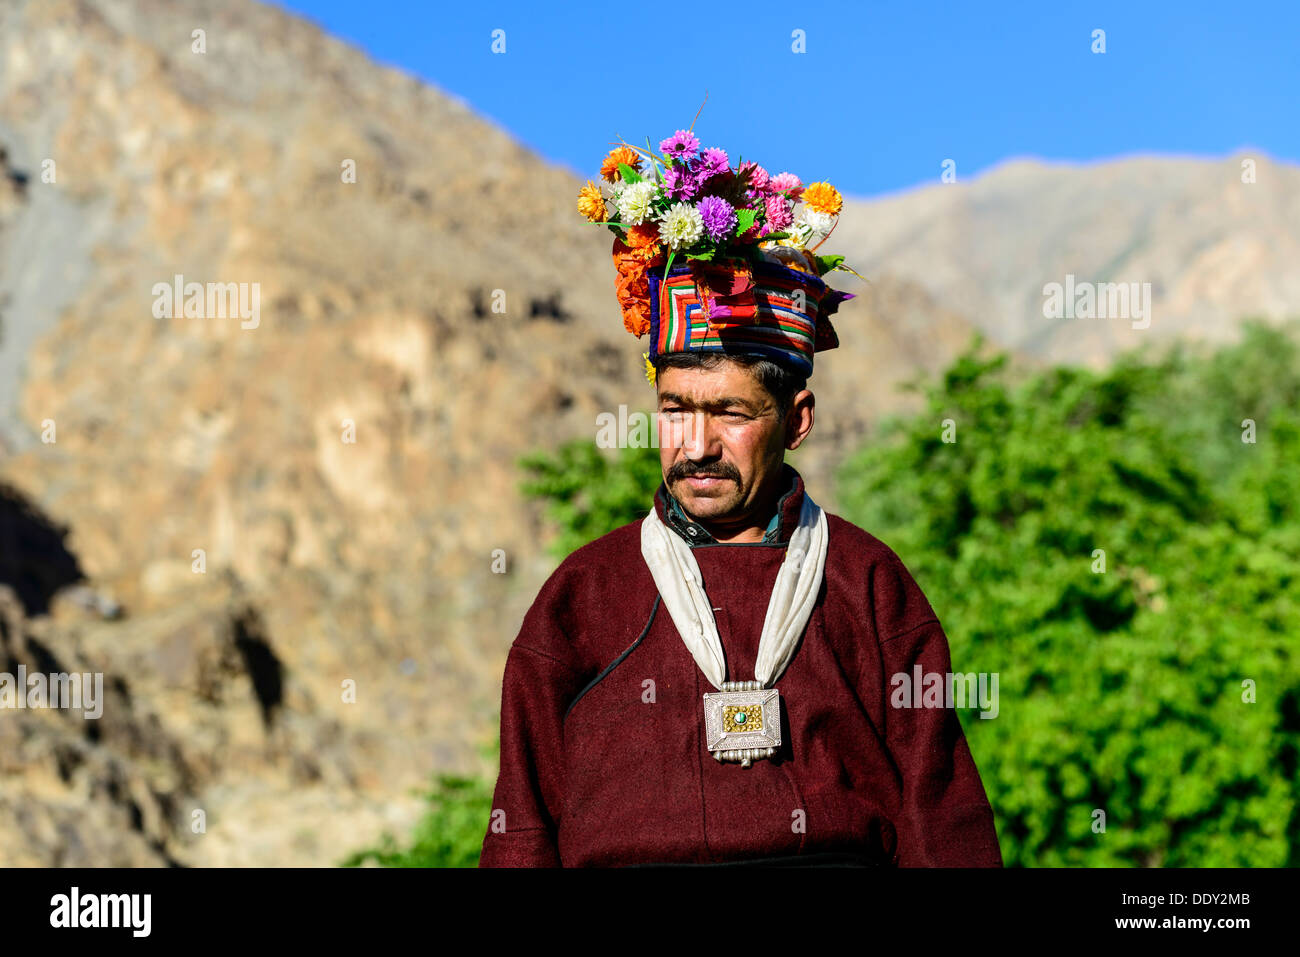 Man of the Brokpa tribe wearing traditional dress with flower headdress Stock Photo